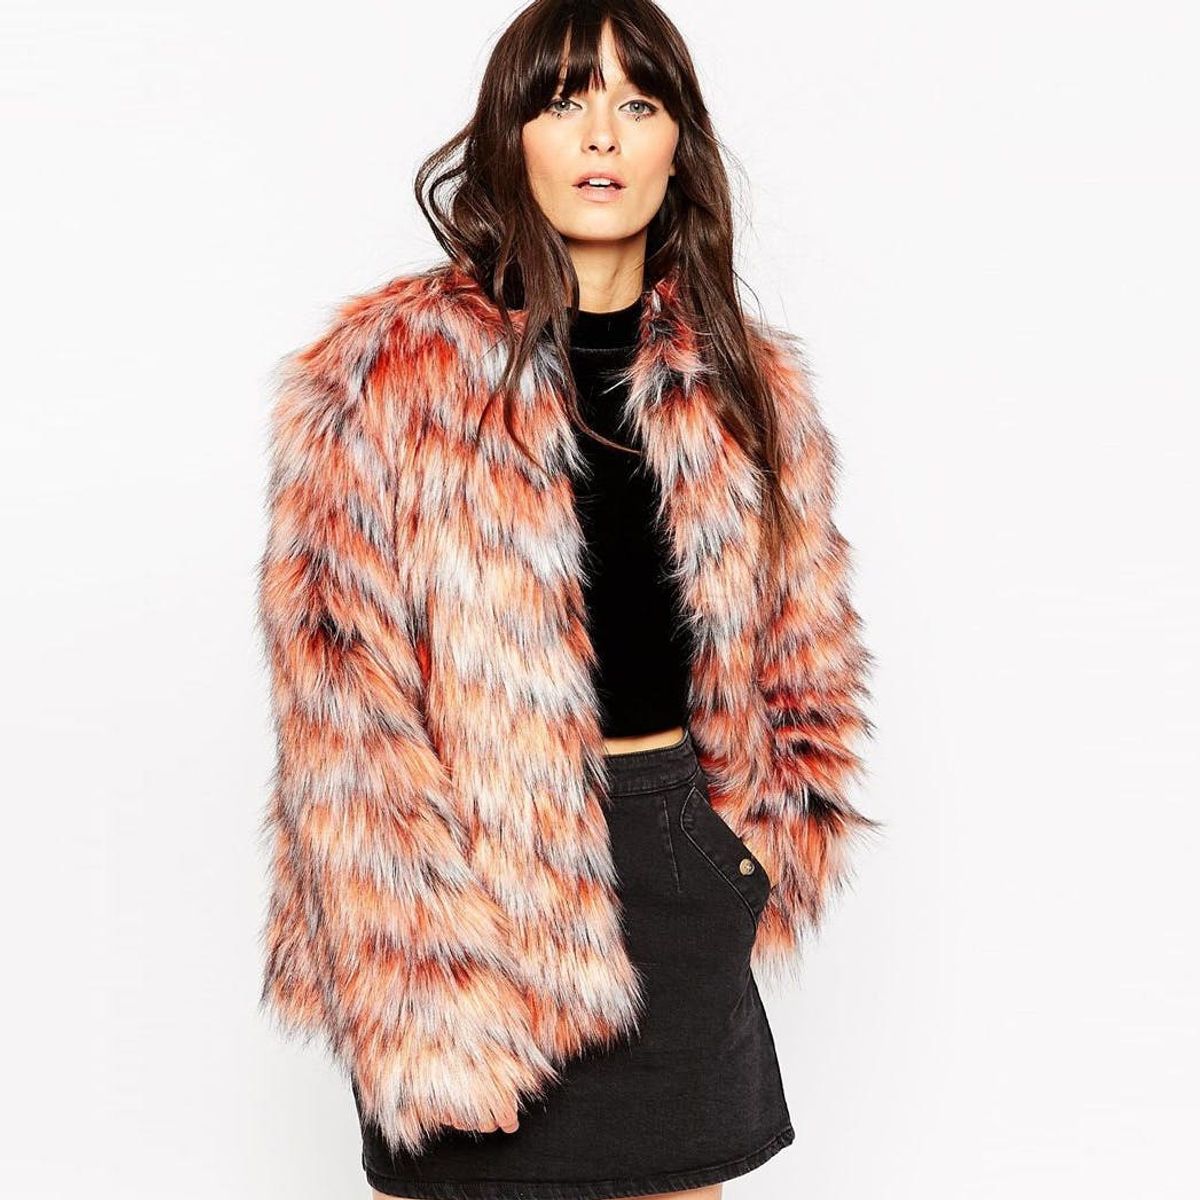 How to Pair Your Winter Coat With Your New Year’s Eve Outfit